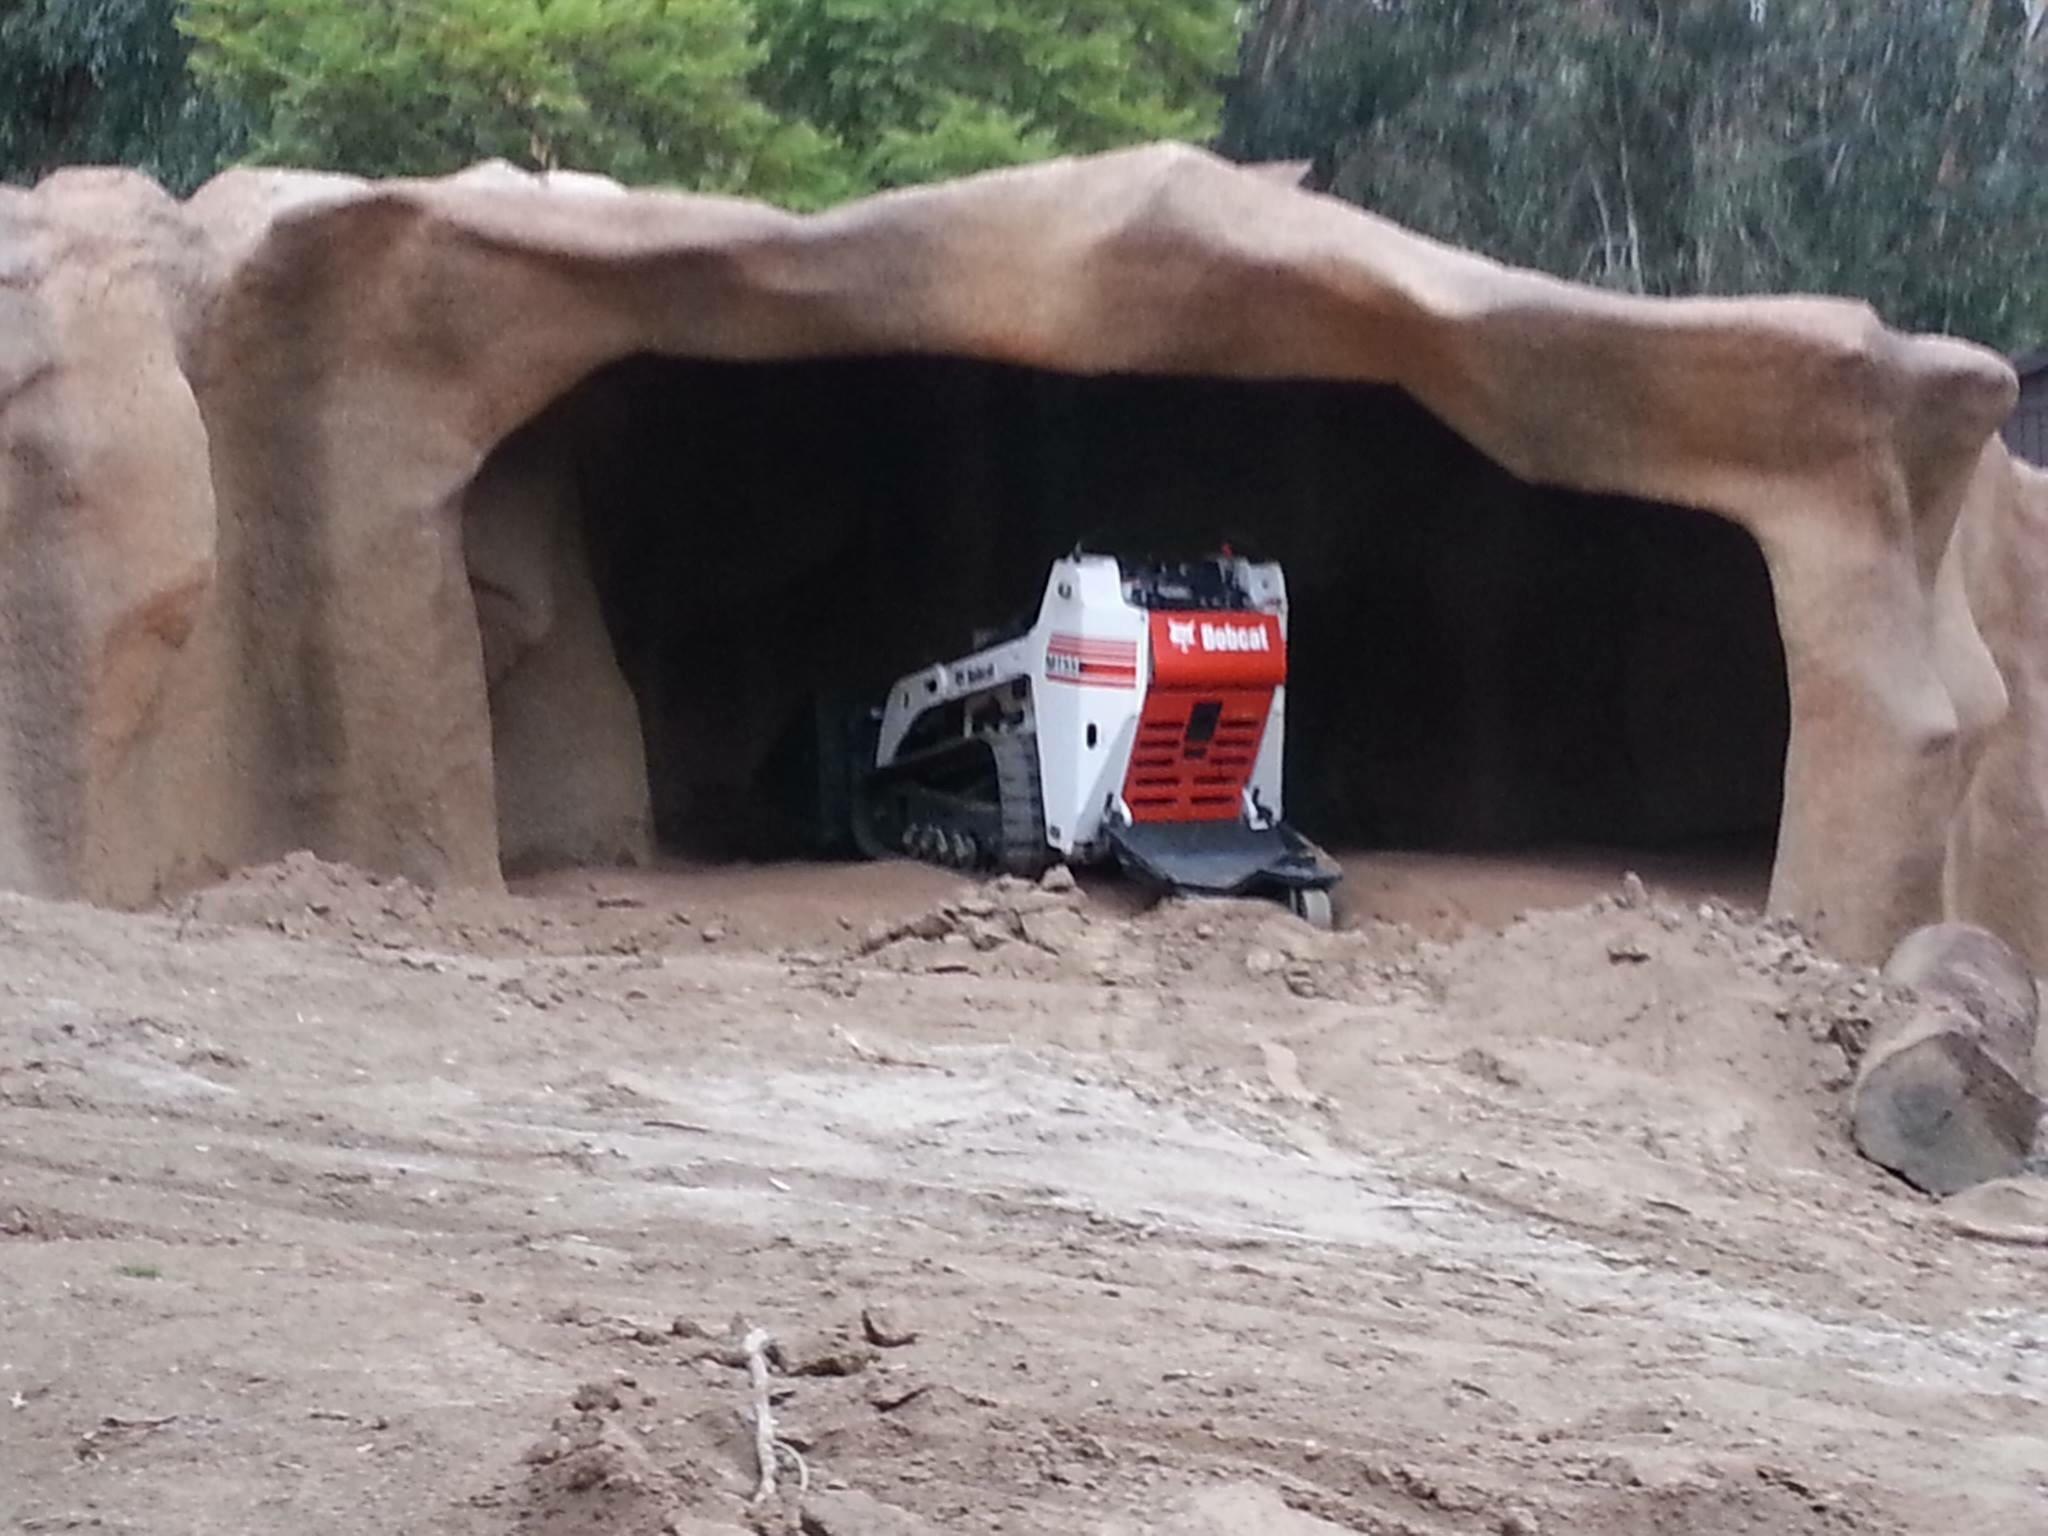 This Bobcat on Exhibit at the San Diego Zoo